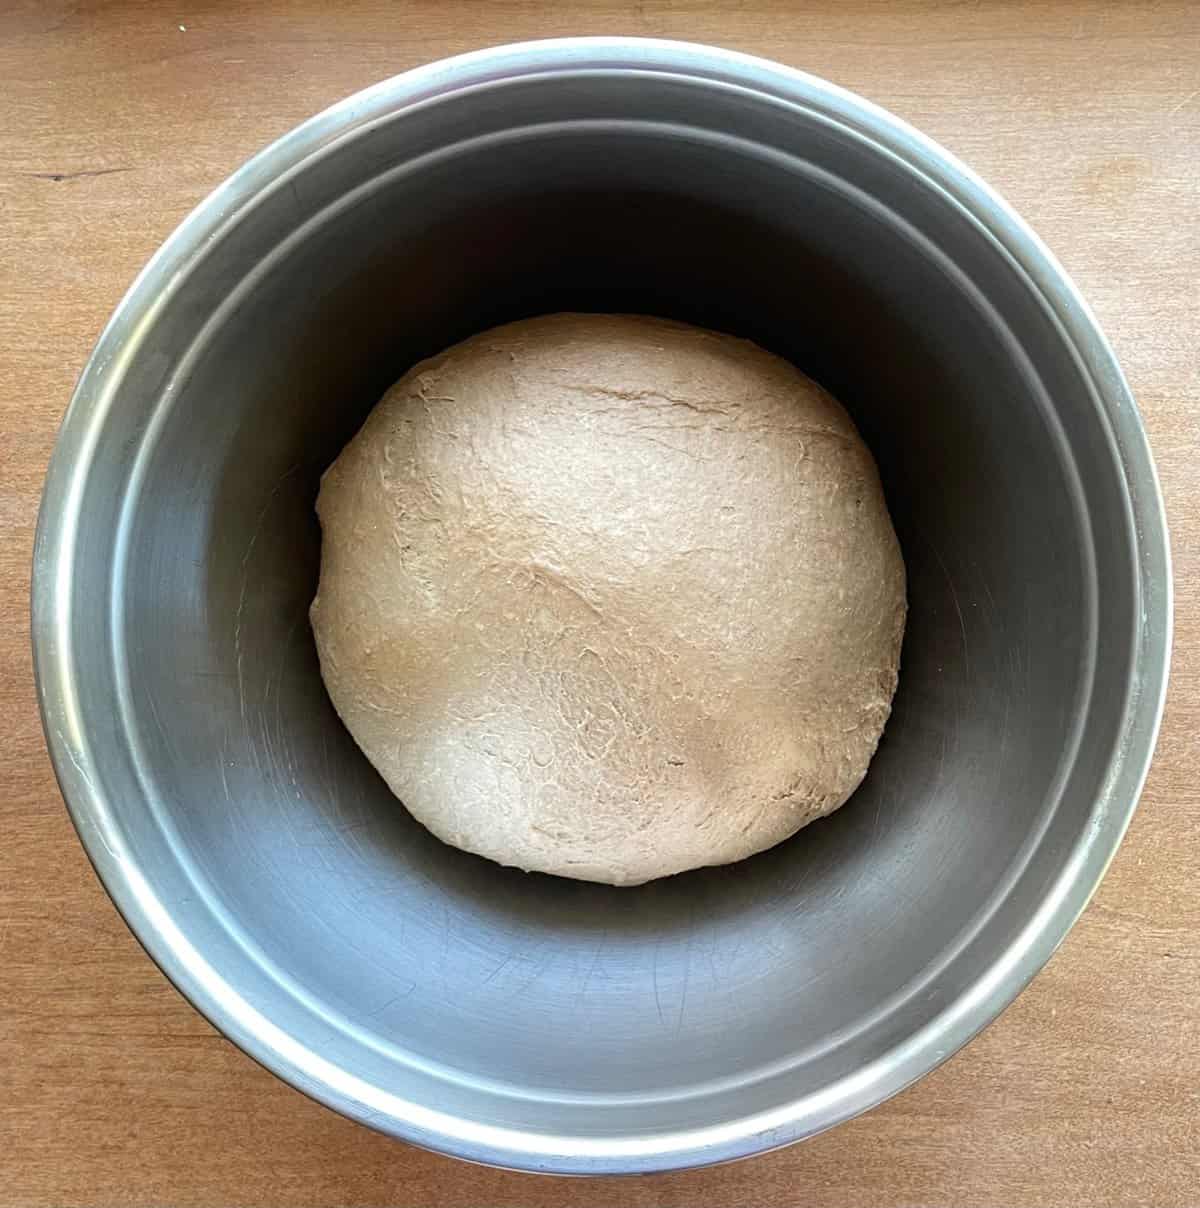 ball of brown bread dough in a mixing bowl after rising.